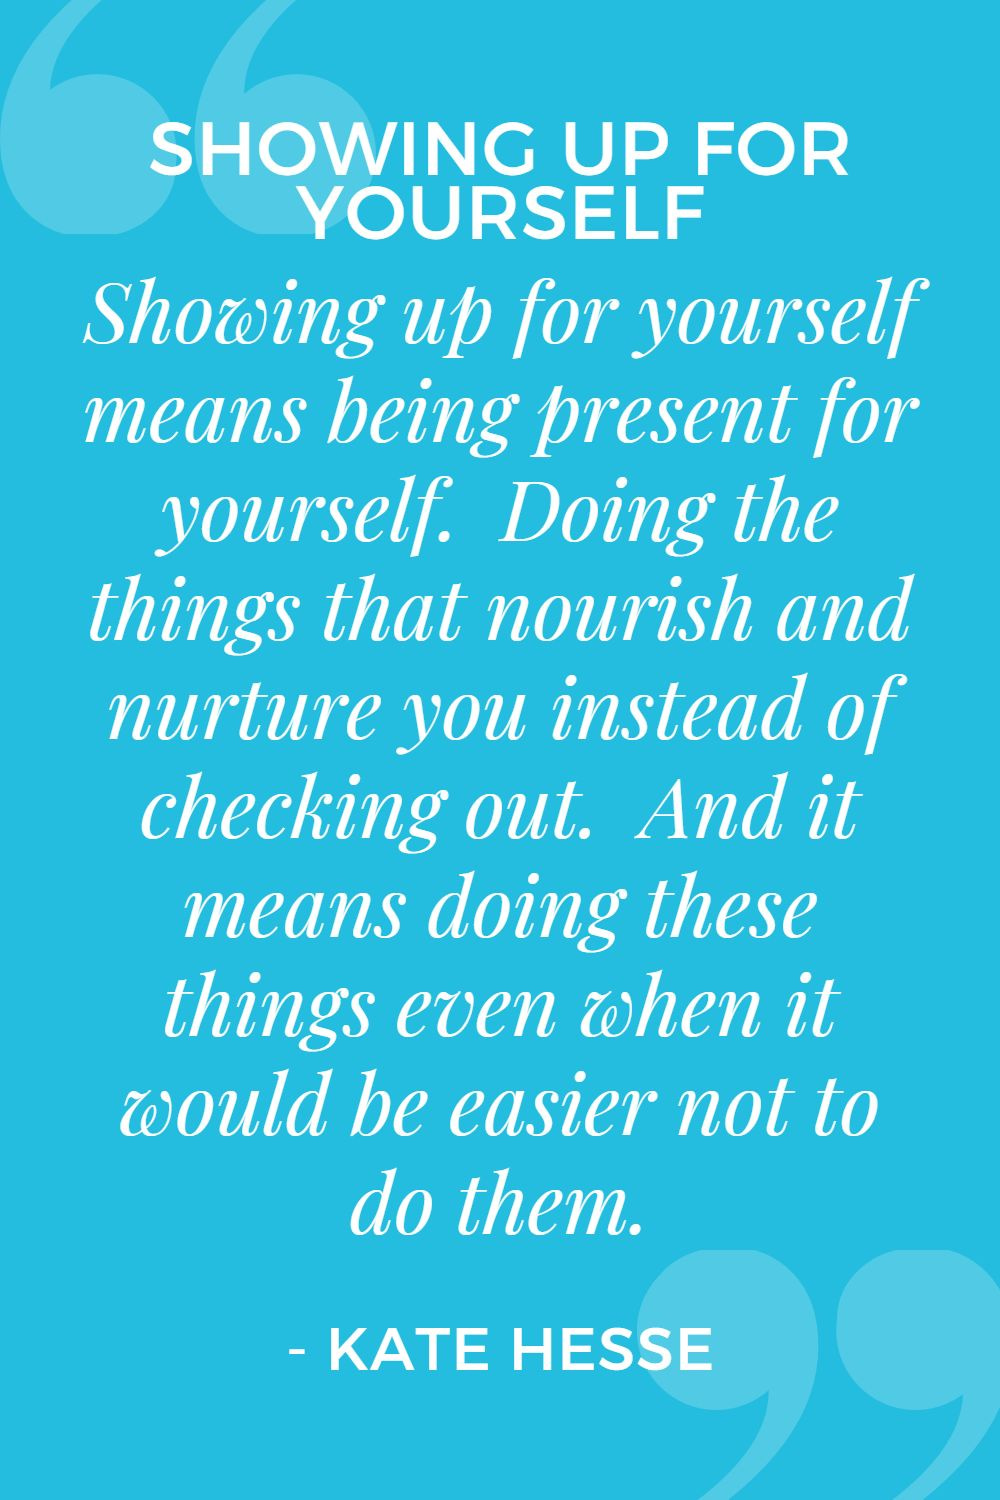 Showing up for yourself means being present for yourself. Doing the things that nourish and nurture you instead of checking out. And it means doing these things even when it would be easier not to do them.